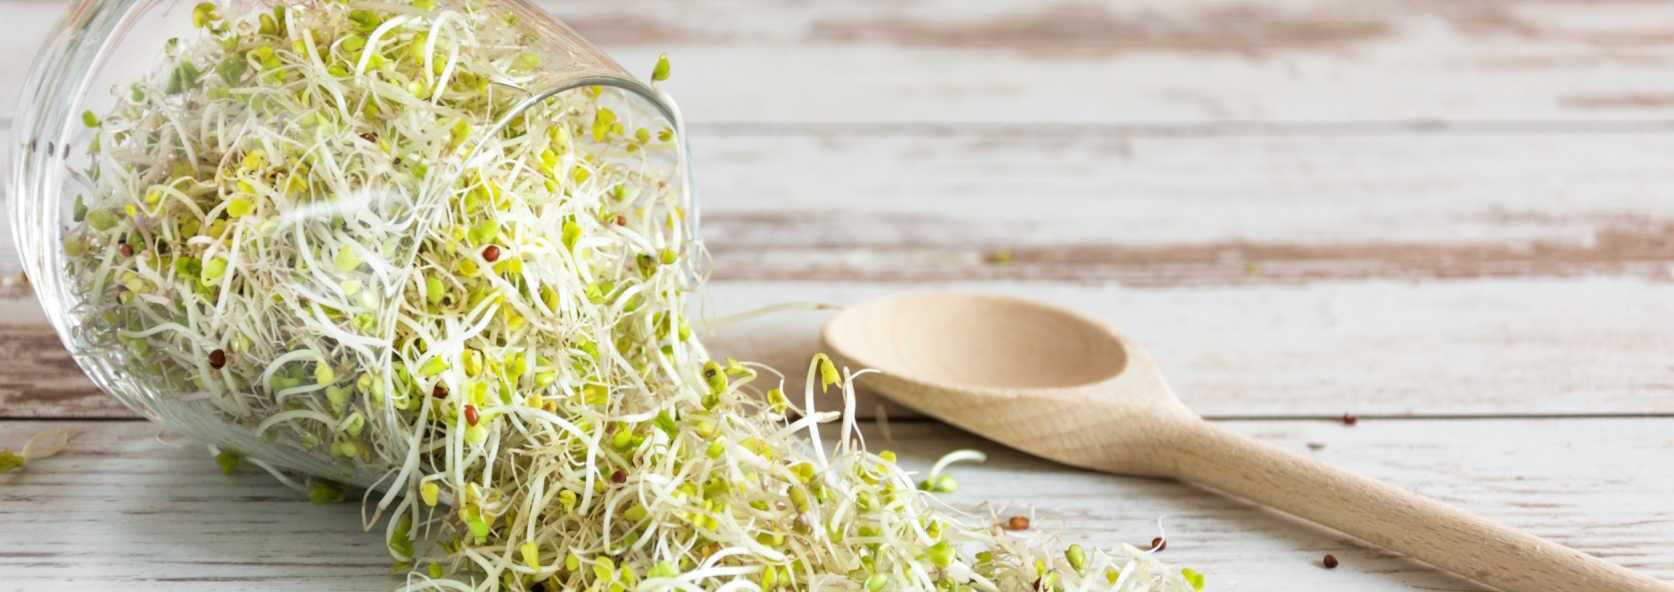 Sprouts_vs_Microgreen_Seeds_18611c78-a953-4bc1-9649-c03b119d1e97.jpg